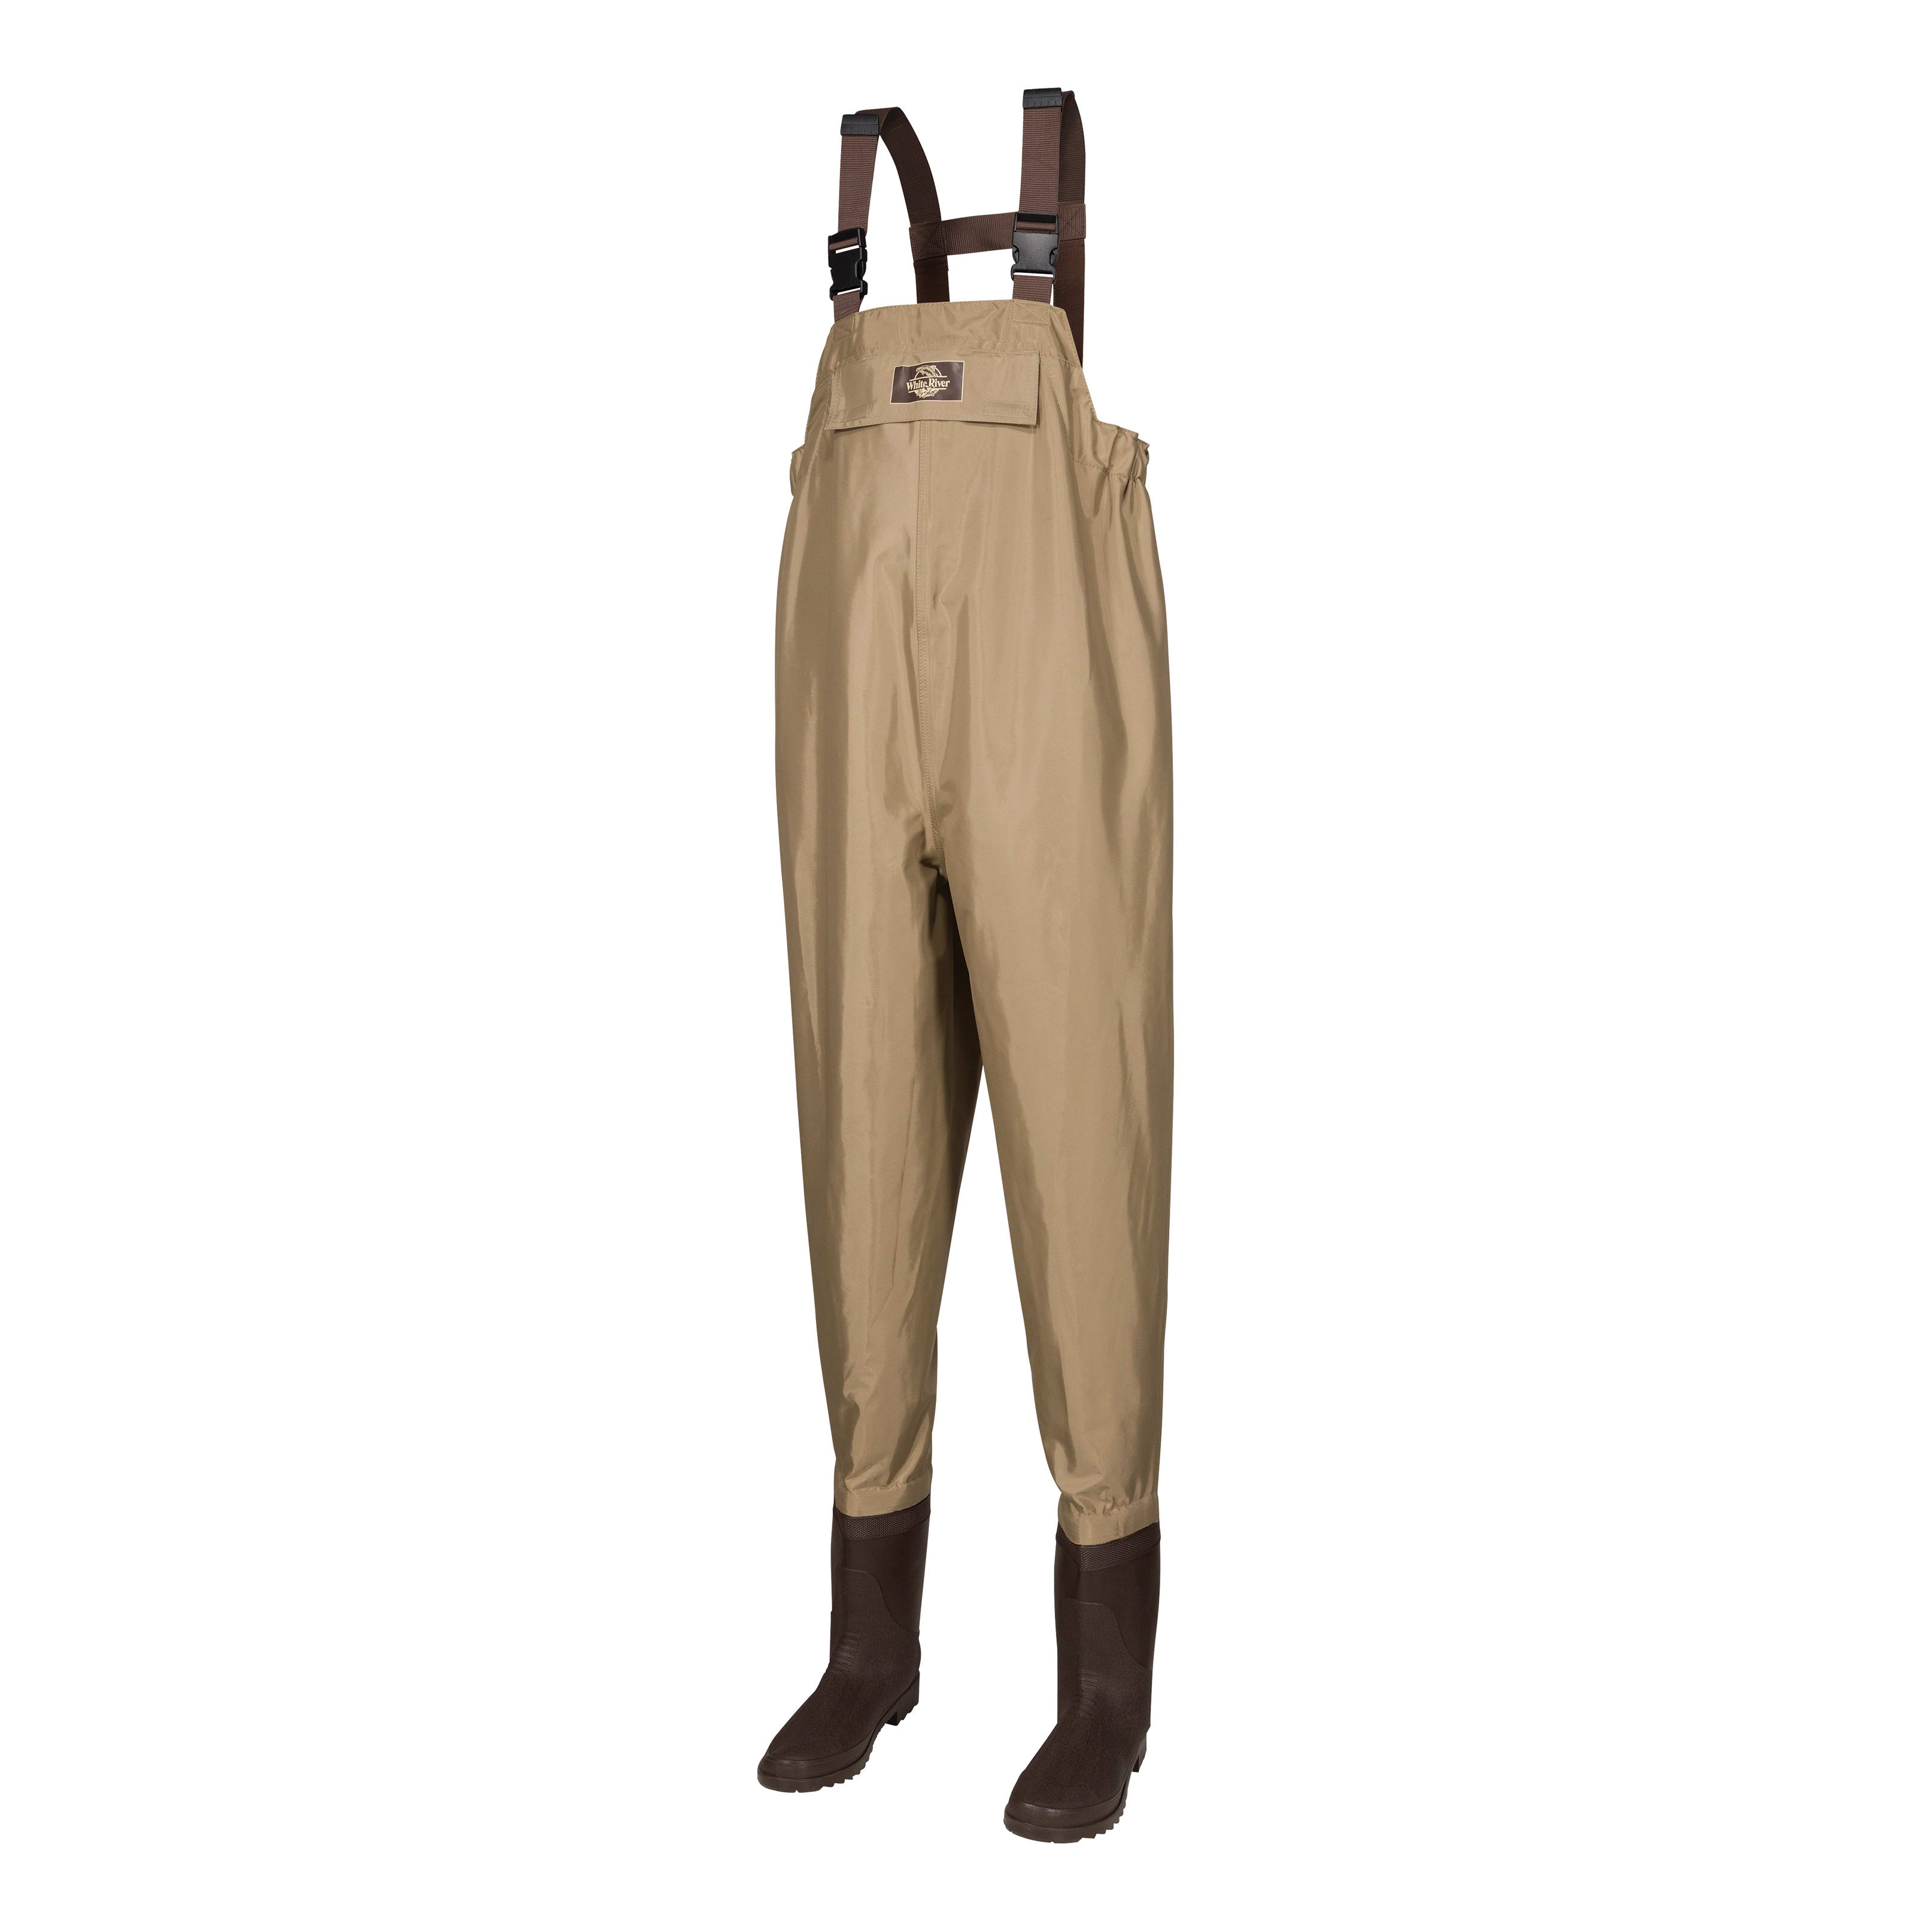 White River Women’s Three Forks Lug-Sole Waders